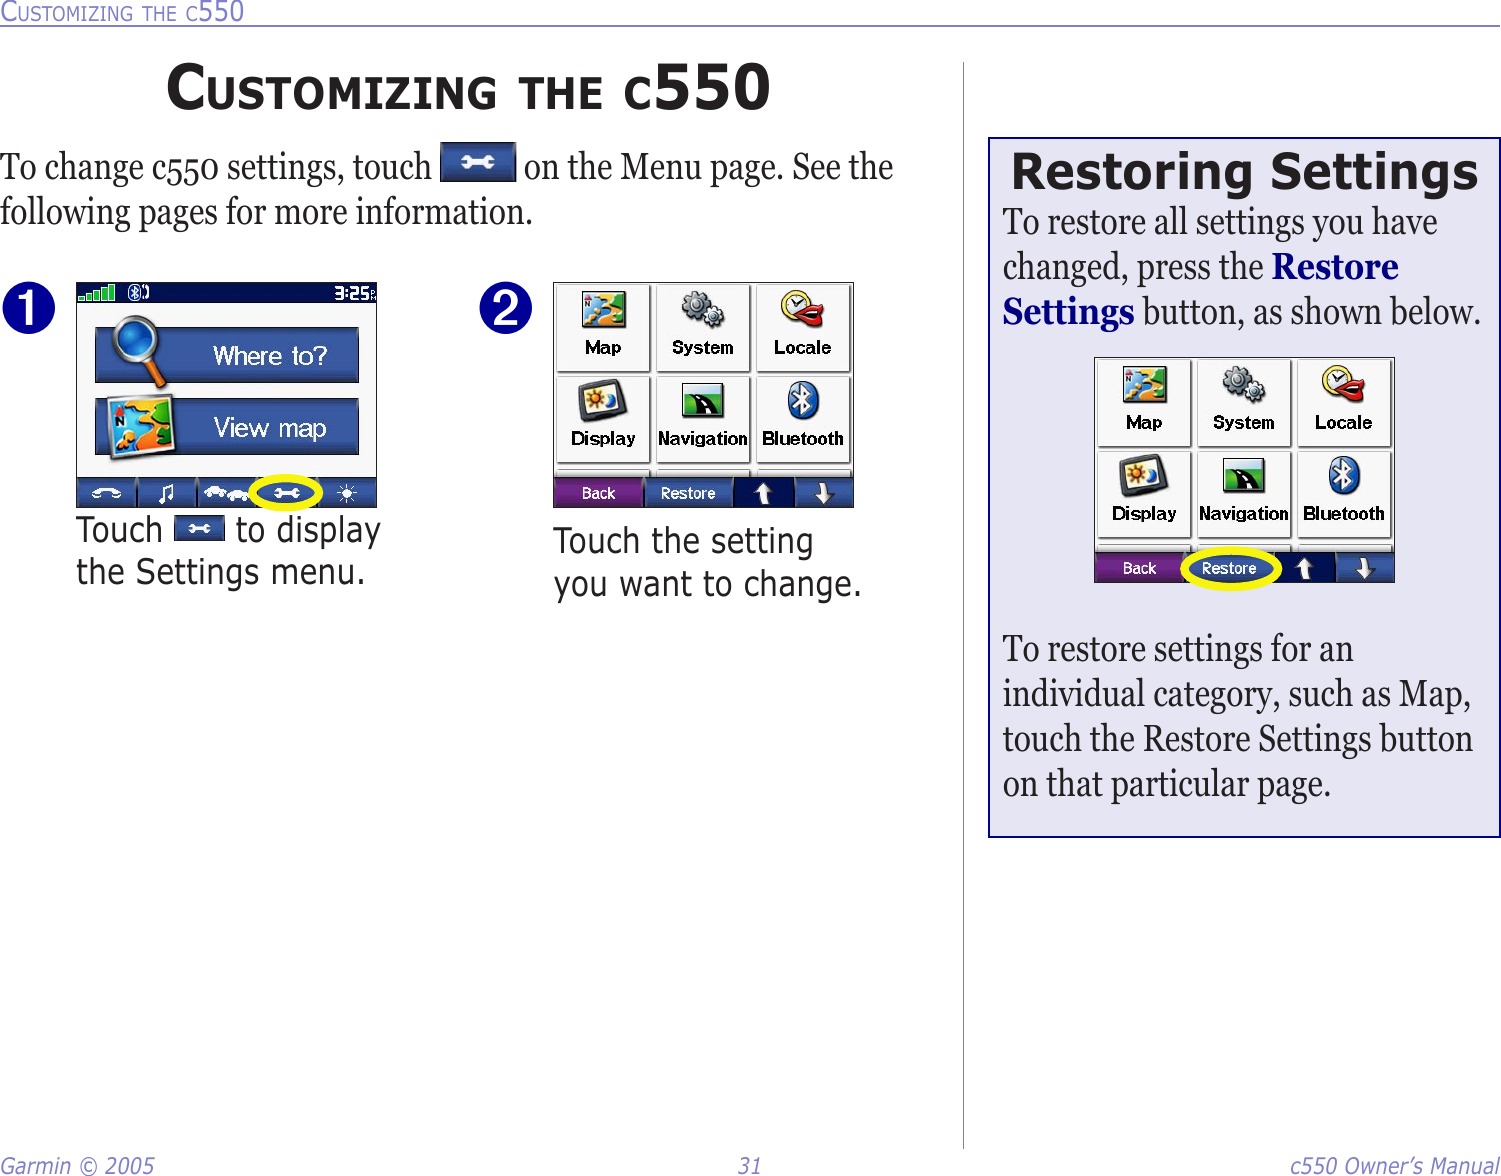 Garmin © 2005  31  c550 Owner’s ManualCUSTOMIZING THE C550CUSTOMIZING THE C550To change c550 settings, touch   on the Menu page. See the following pages for more information.Touch   to display the Settings menu.➊Touch the setting you want to change. ➋Restoring SettingsTo restore all settings you have changed, press the Restore Settings button, as shown below. To restore settings for an individual category, such as Map, touch the Restore Settings button on that particular page. 